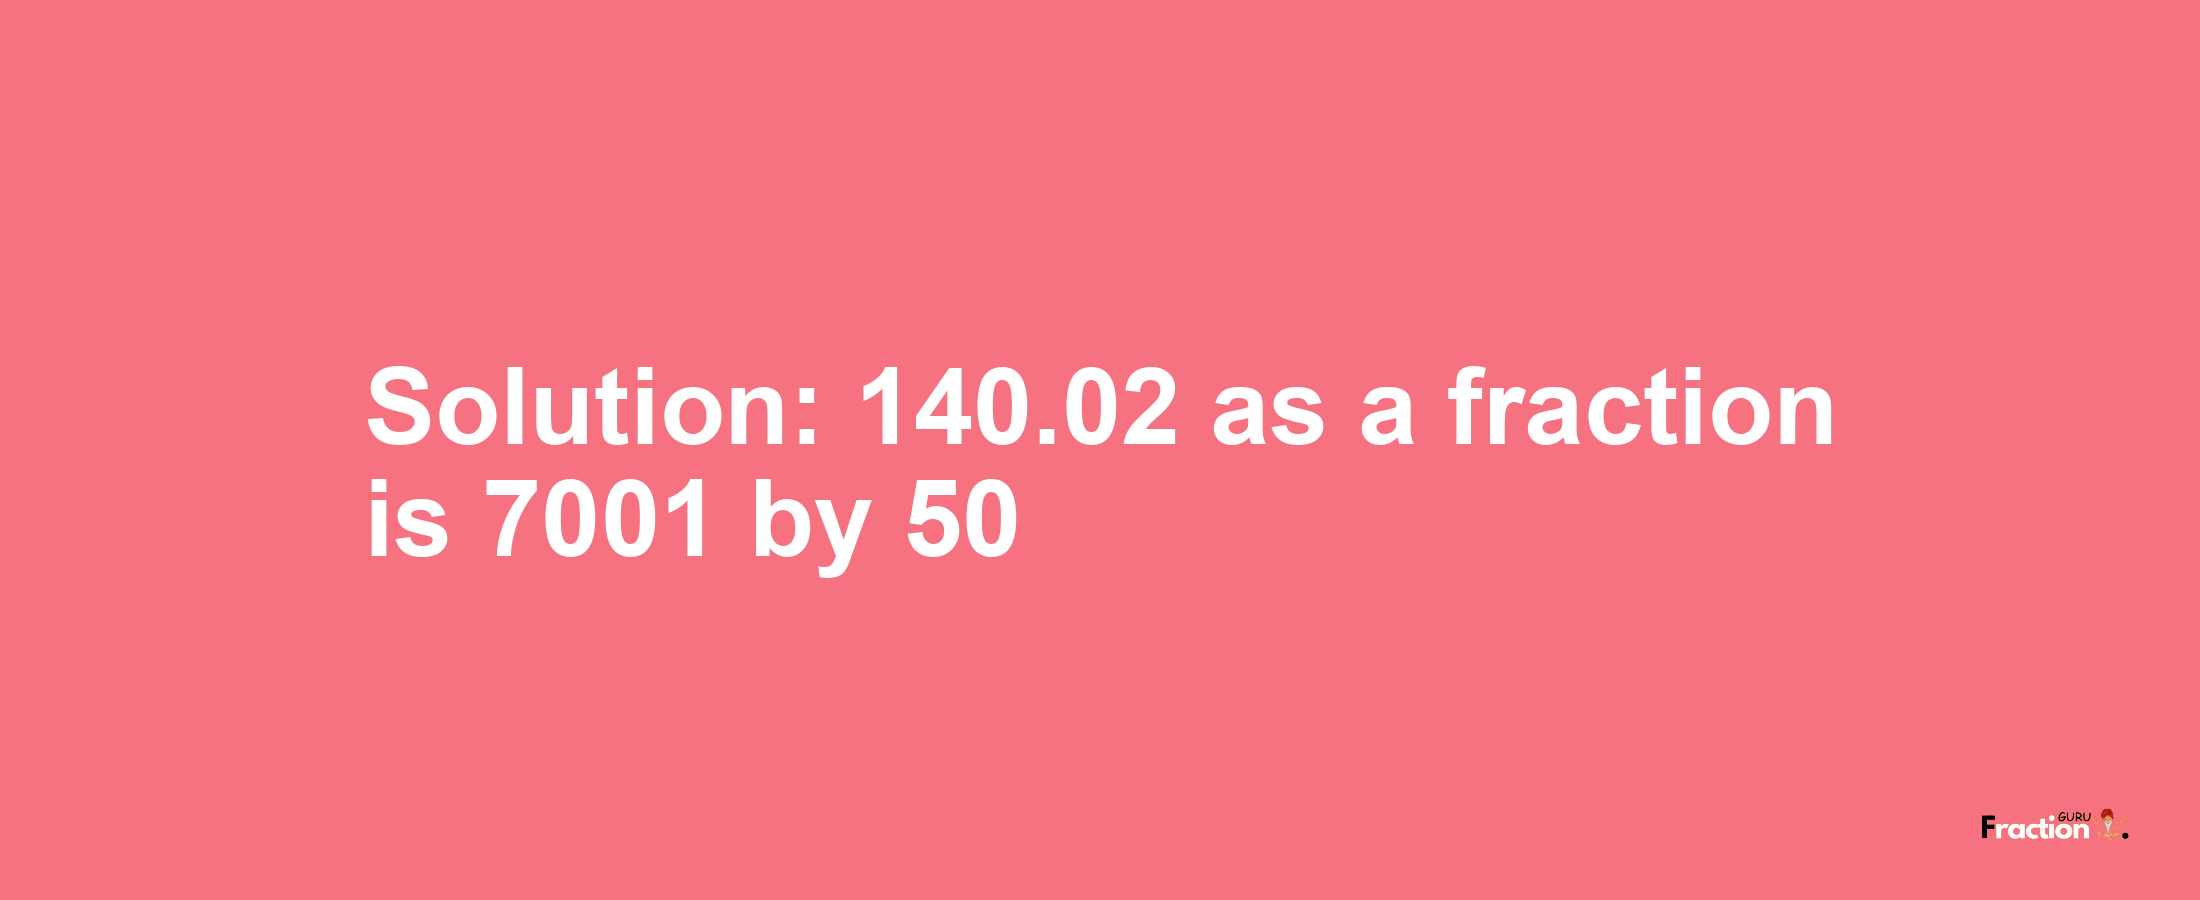 Solution:140.02 as a fraction is 7001/50